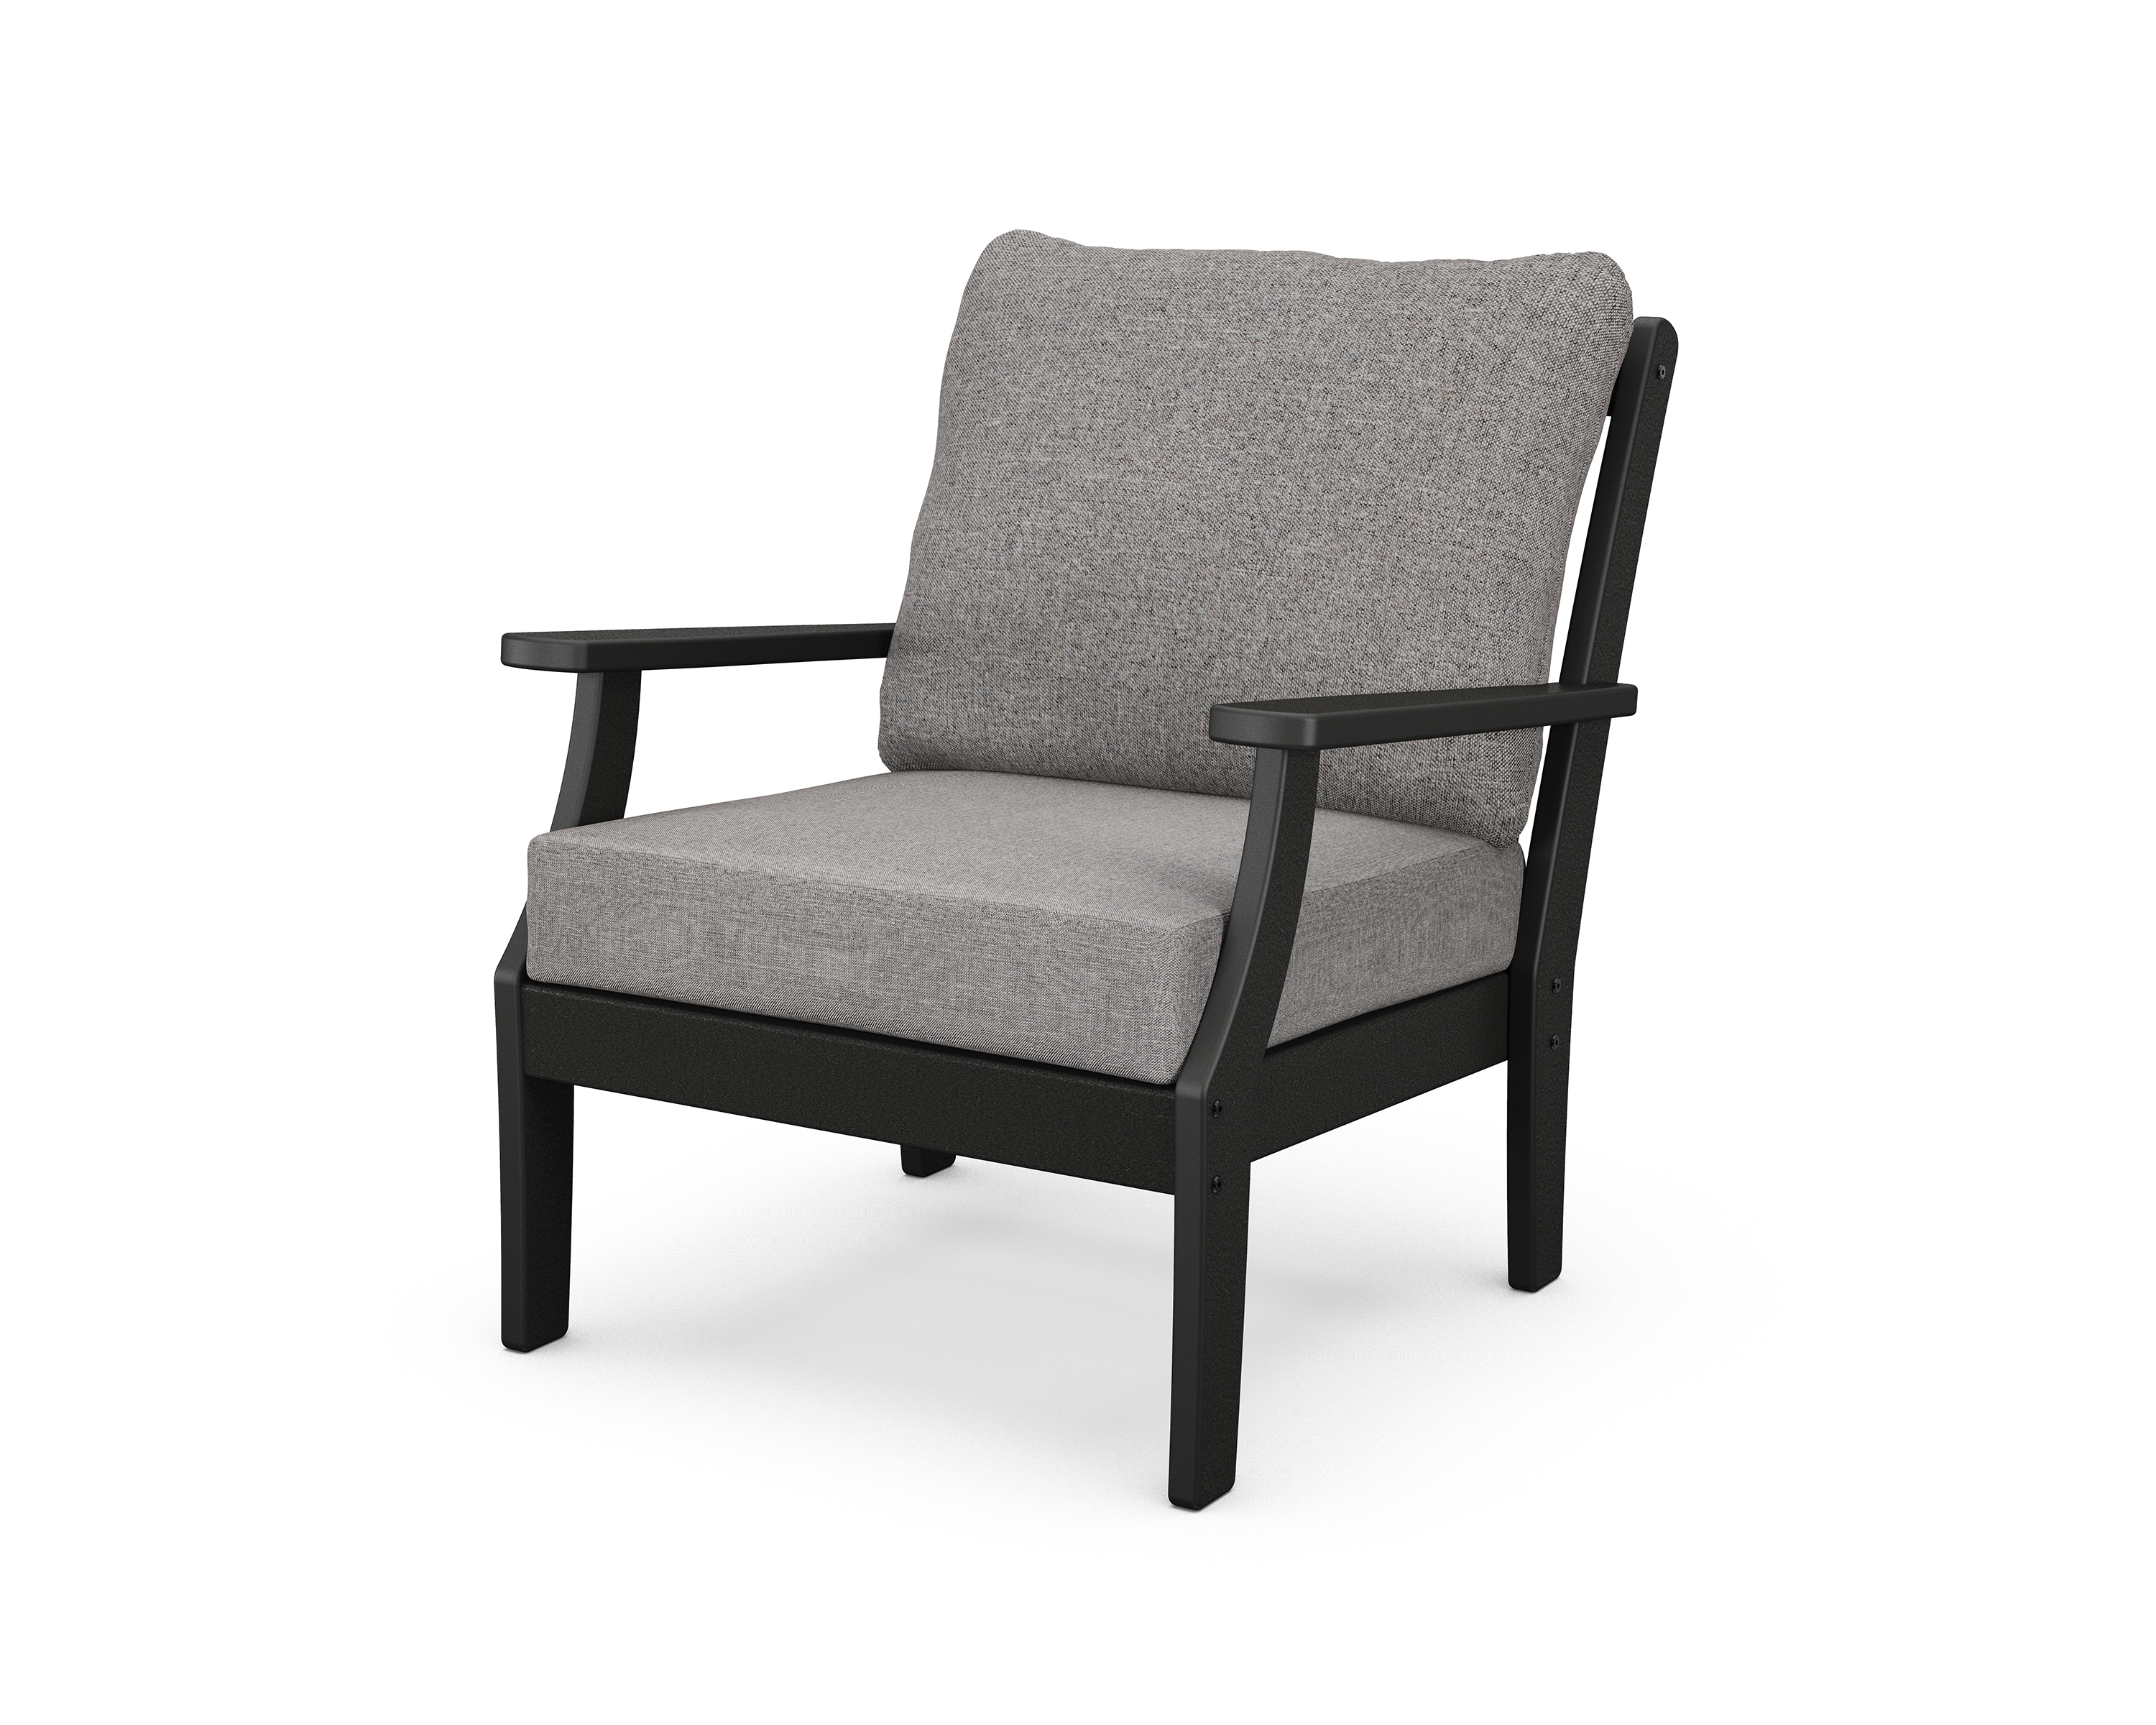 braxton deep seating chair in black / grey mist product image